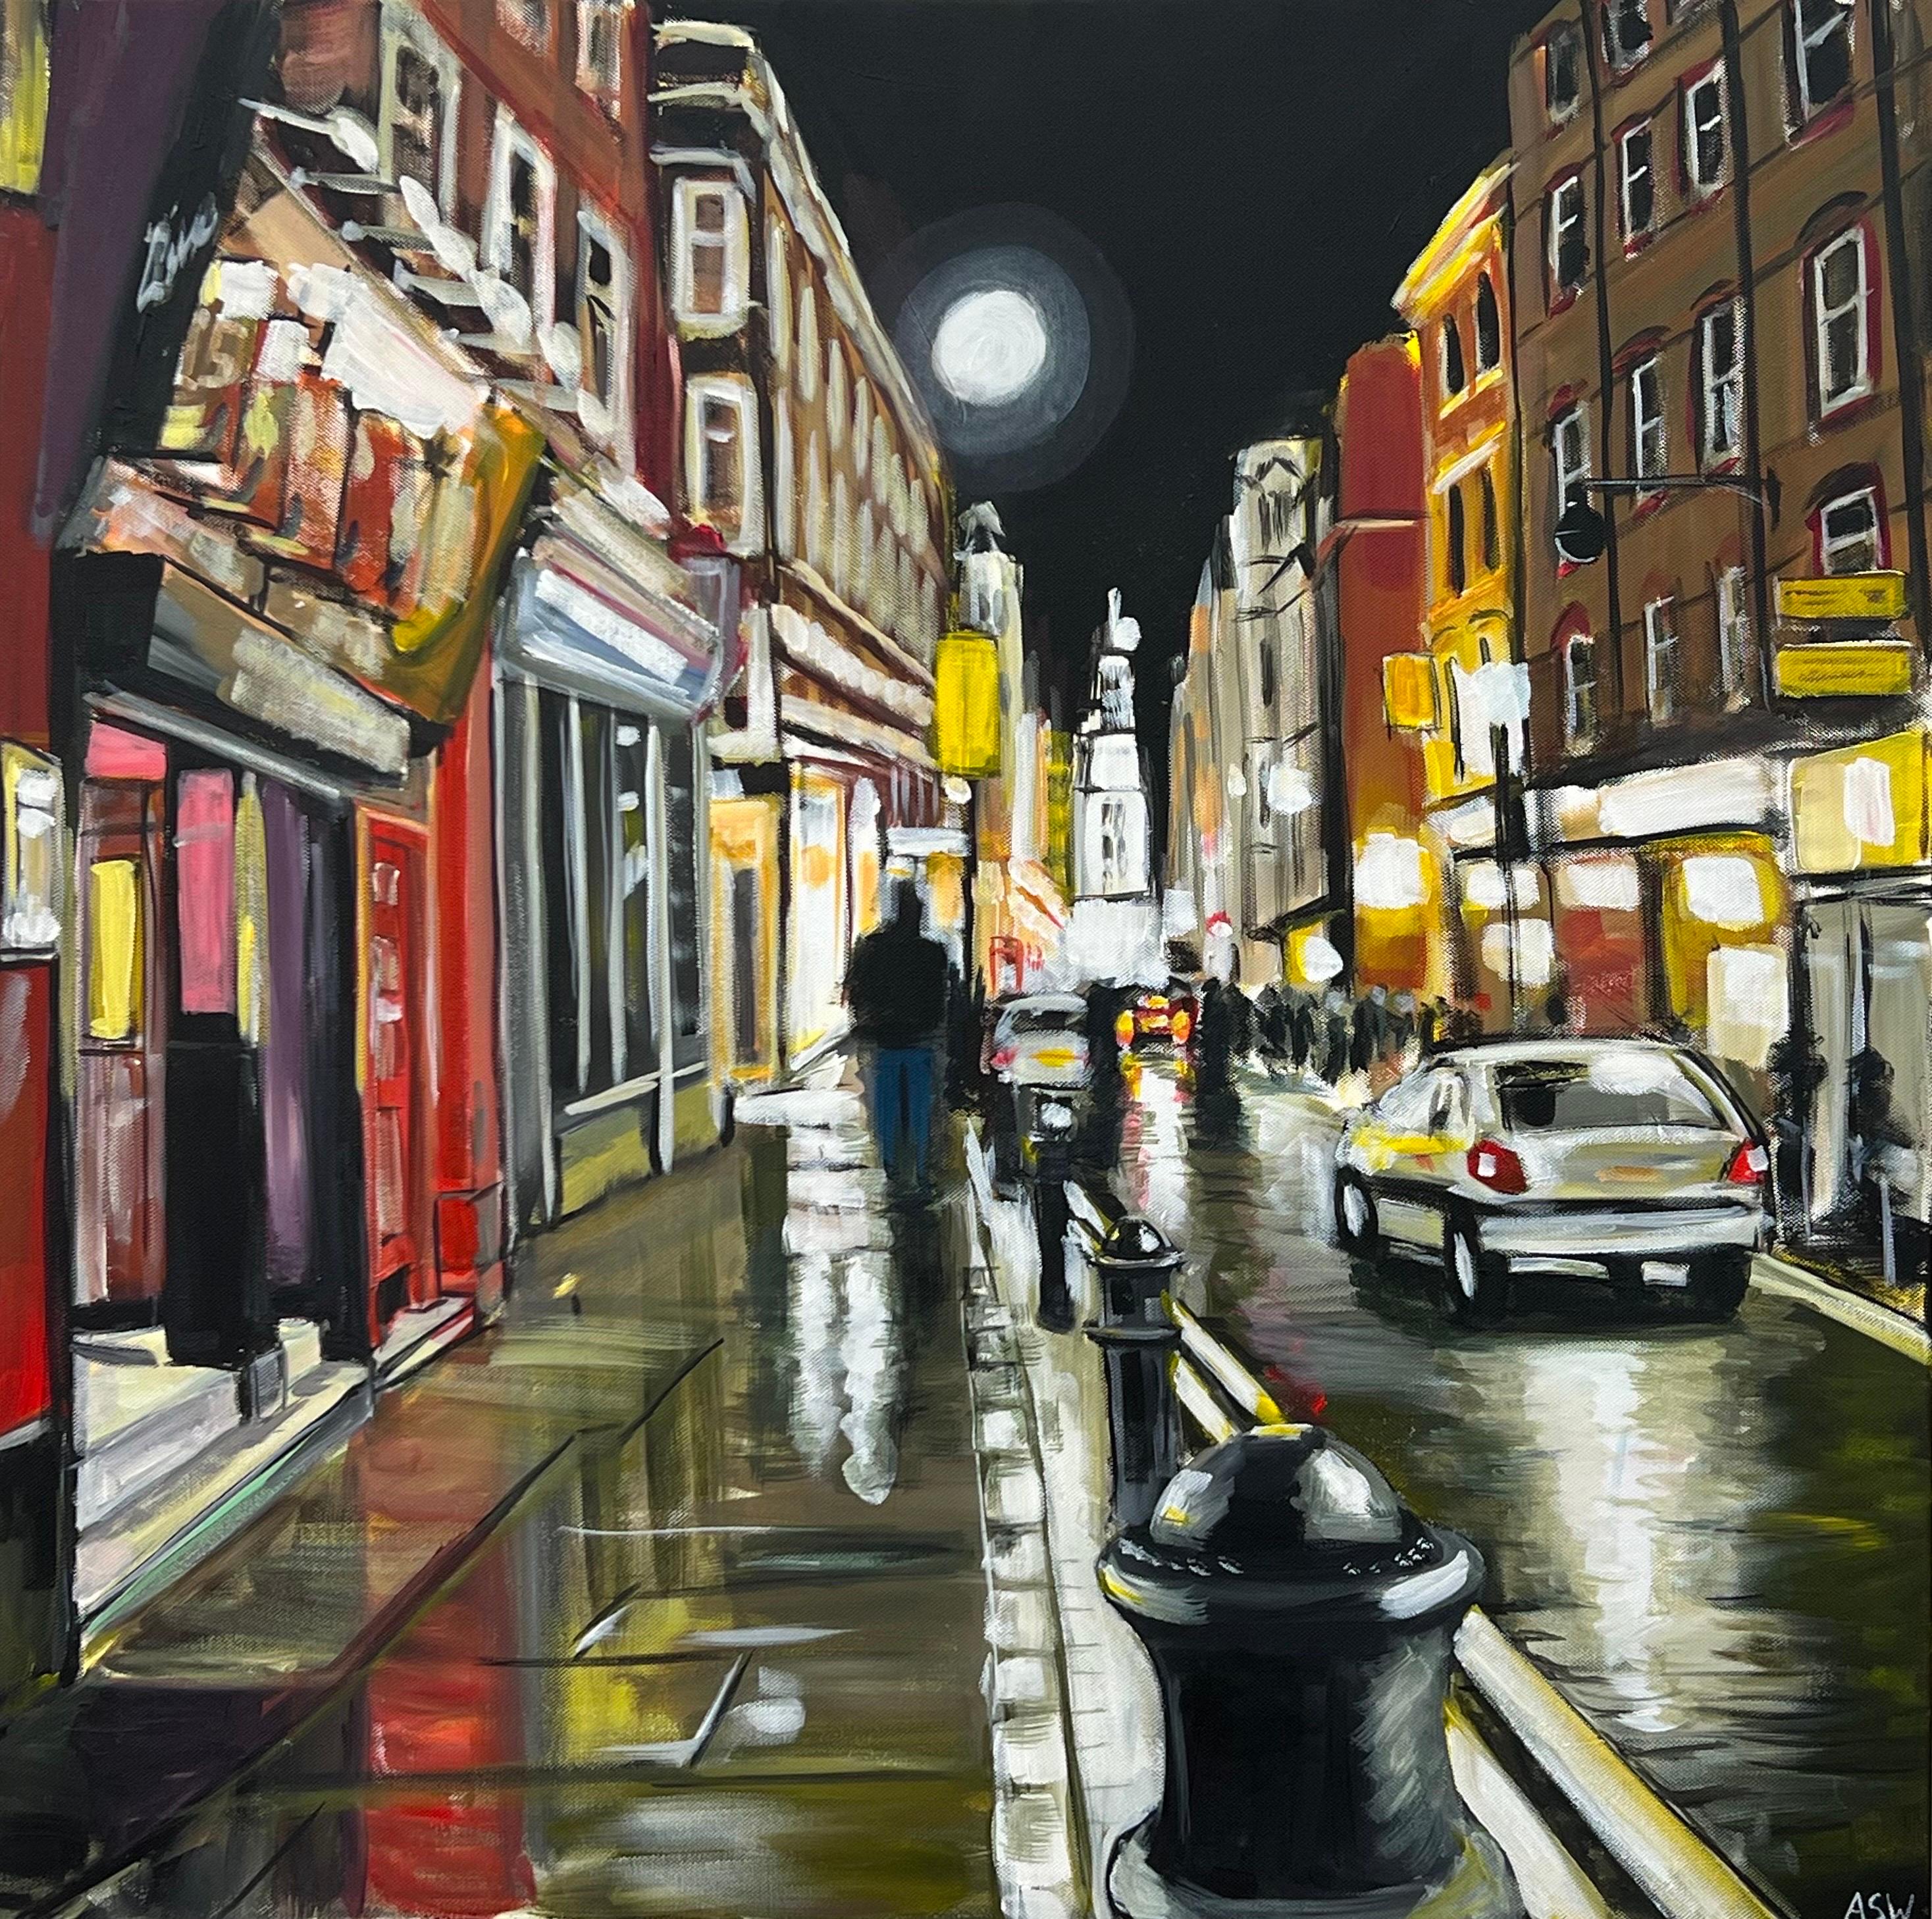 Angela Wakefield Figurative Painting - Modern Impressionist Painting of Soho London at Night by Urban Landscape Artist